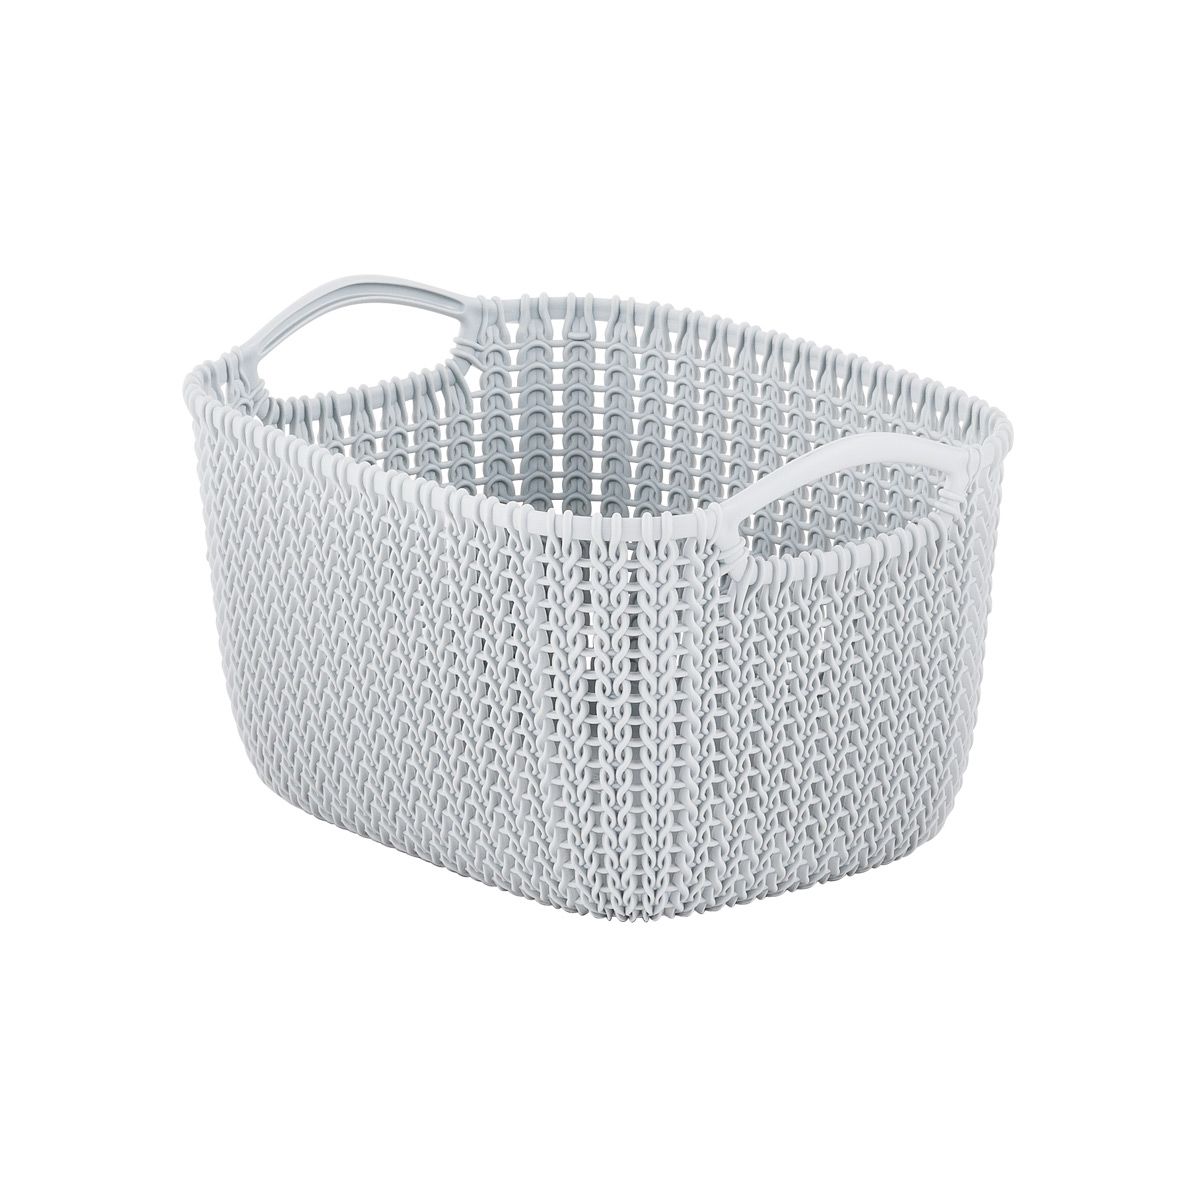 Curver Medium Knit Basket Cloudy Grey | The Container Store